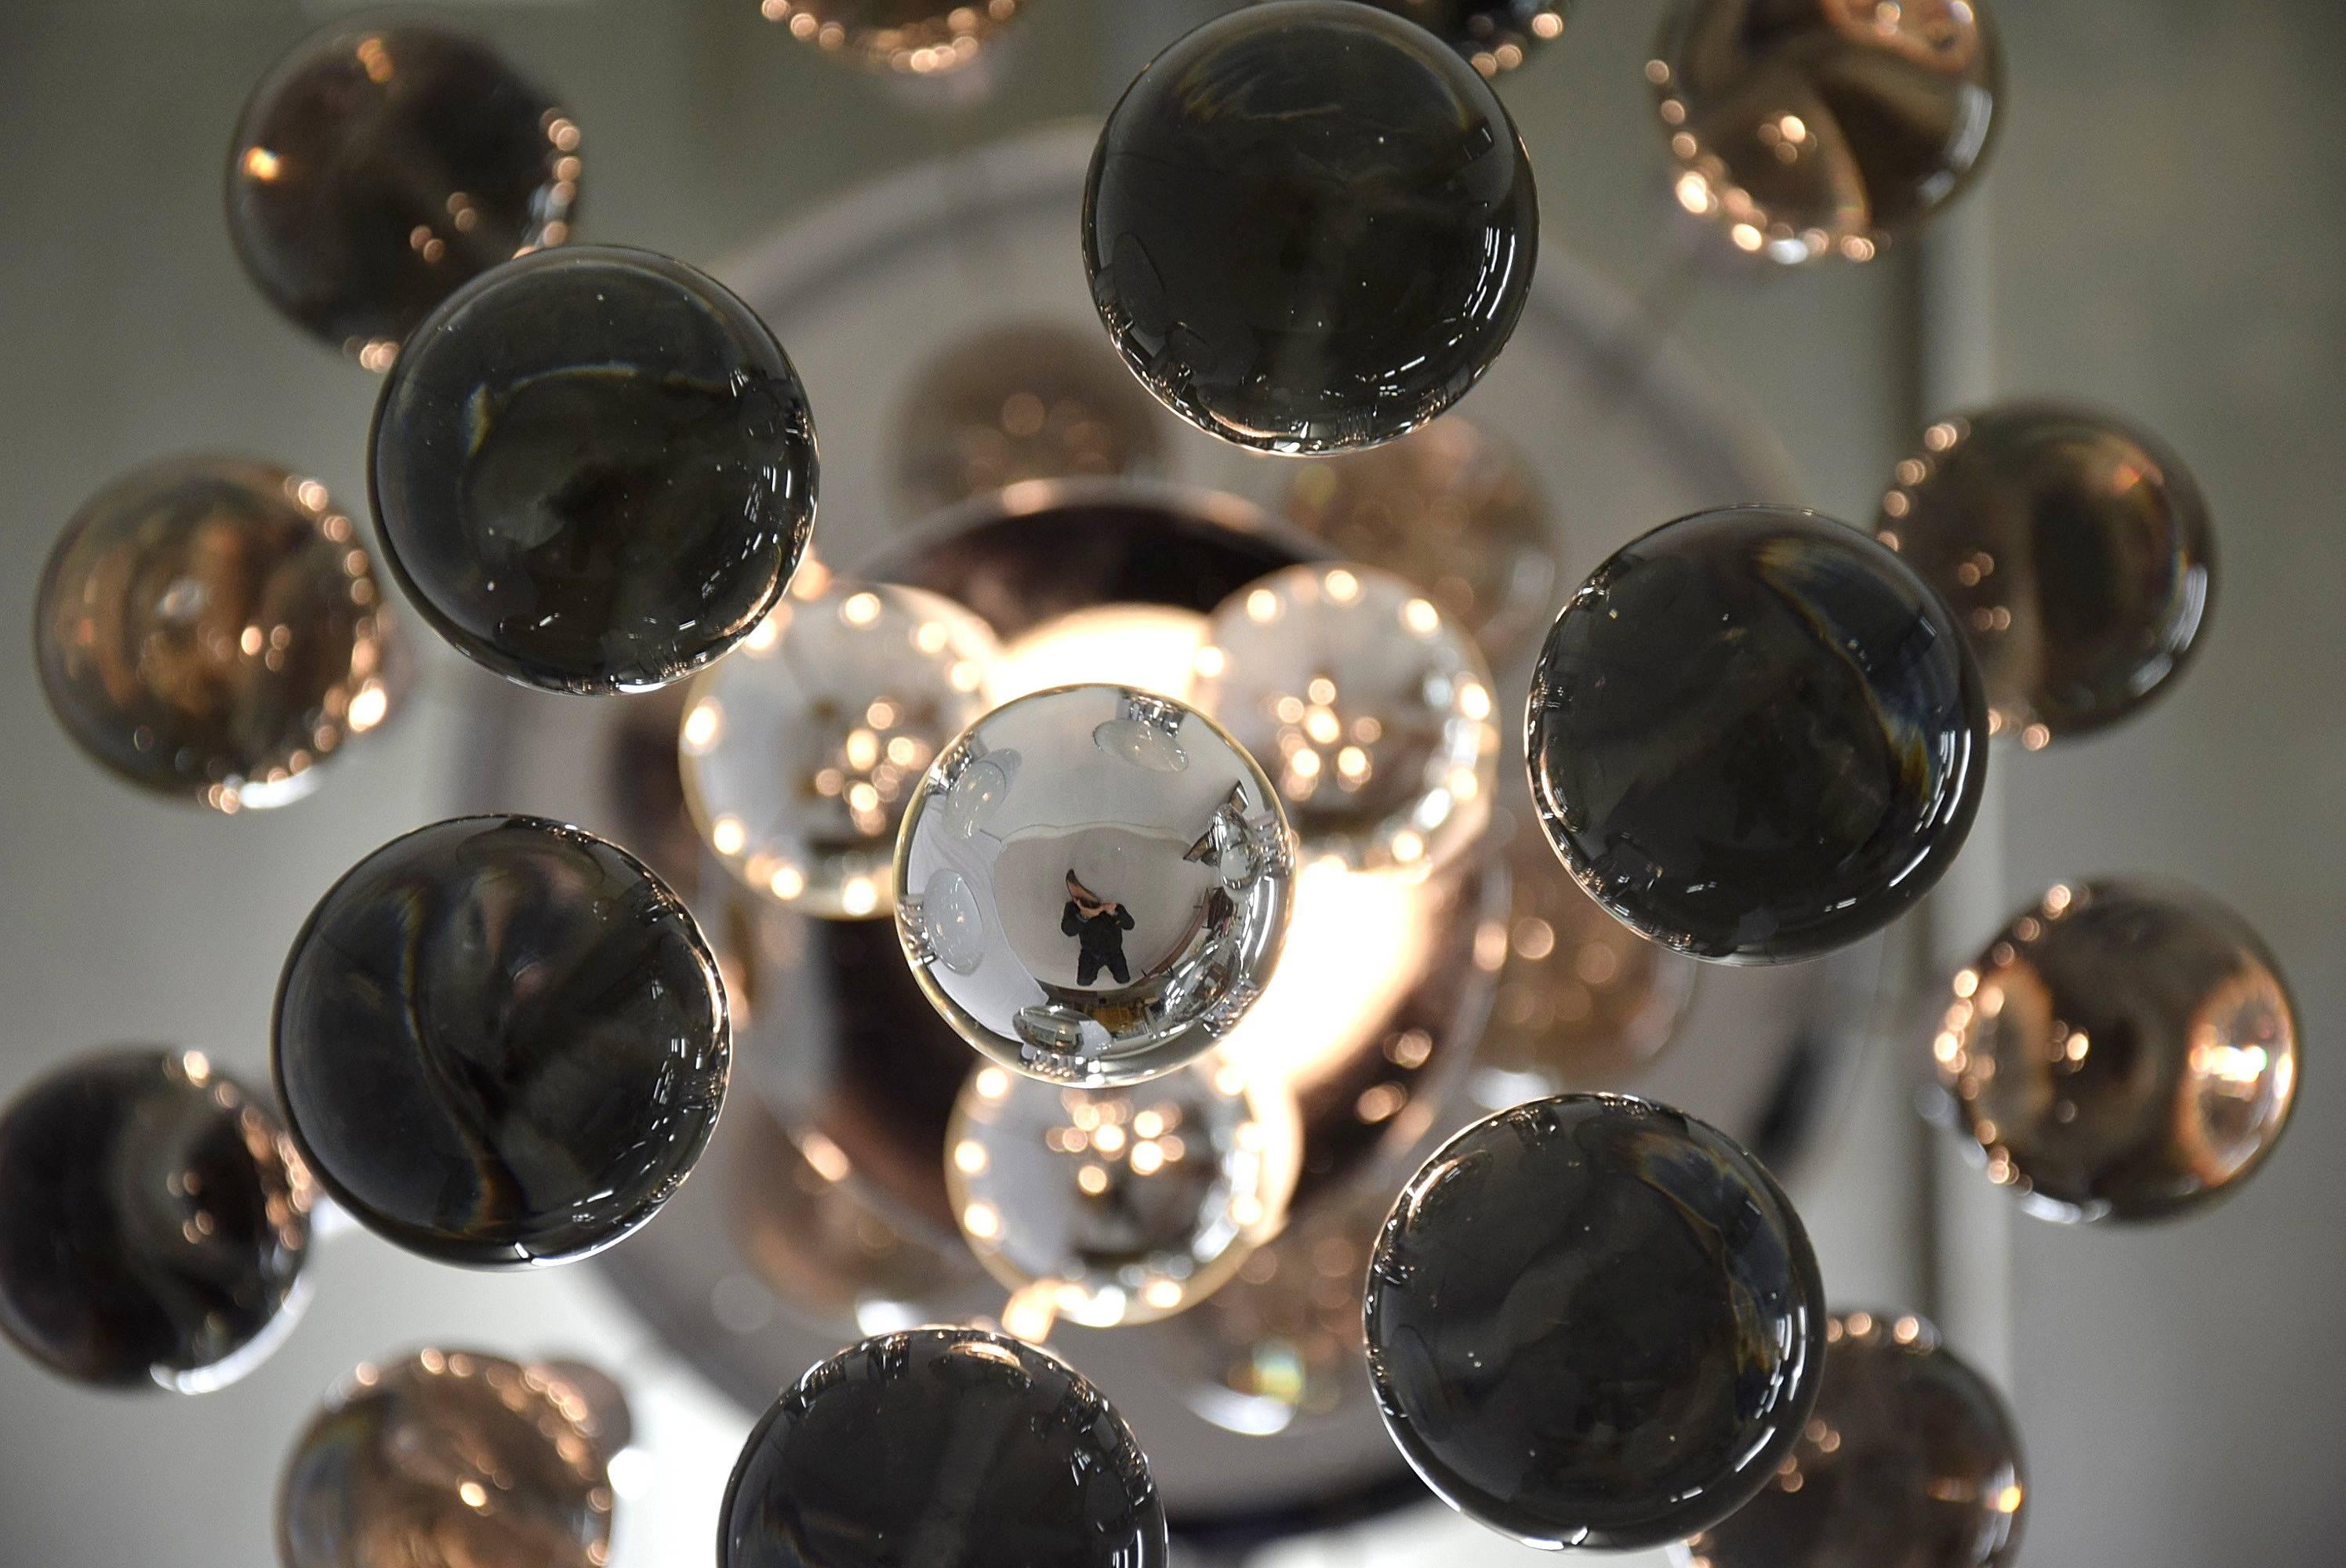 Gaetano Sciolari mid century modern chandelier
A work of Art, created by Gaetano Sciolari in the 1970s.
Sciolari`s first designs were Atom inspired pendants, but in the 1960s he shifted to conventional chandelier forms like the neoclassical Sciolari